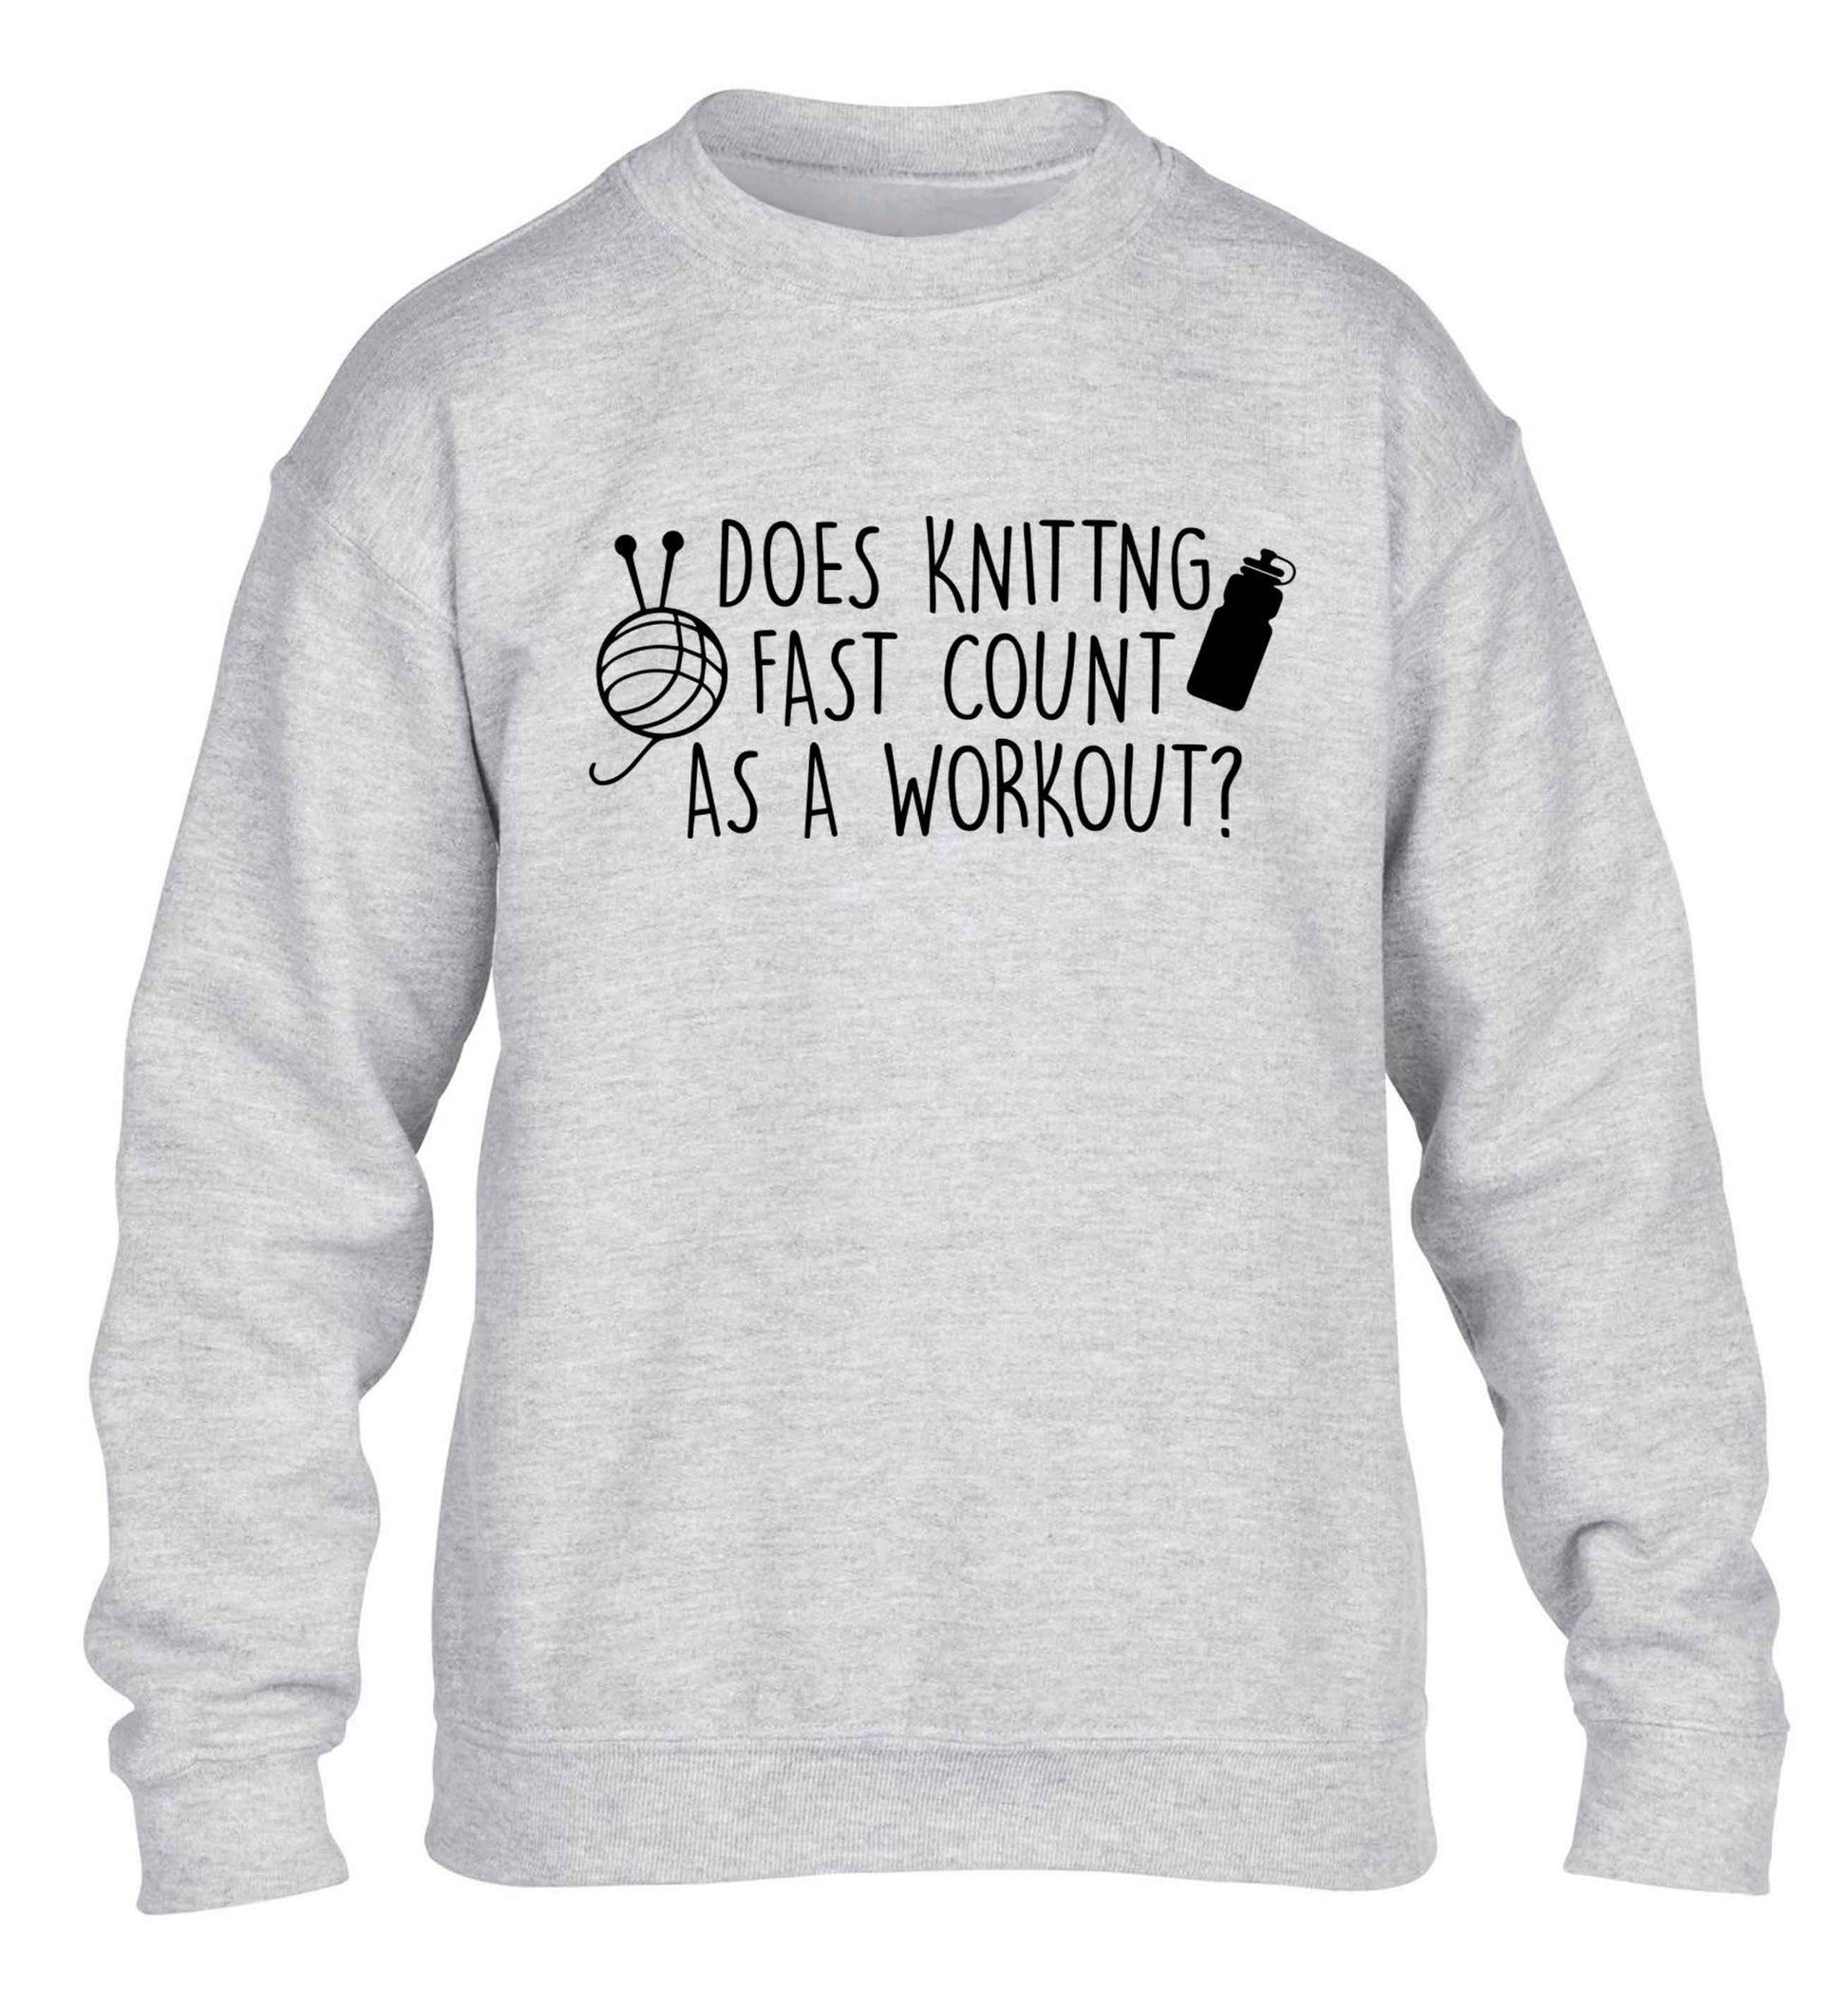 Does knitting fast count as a workout? children's grey sweater 12-13 Years